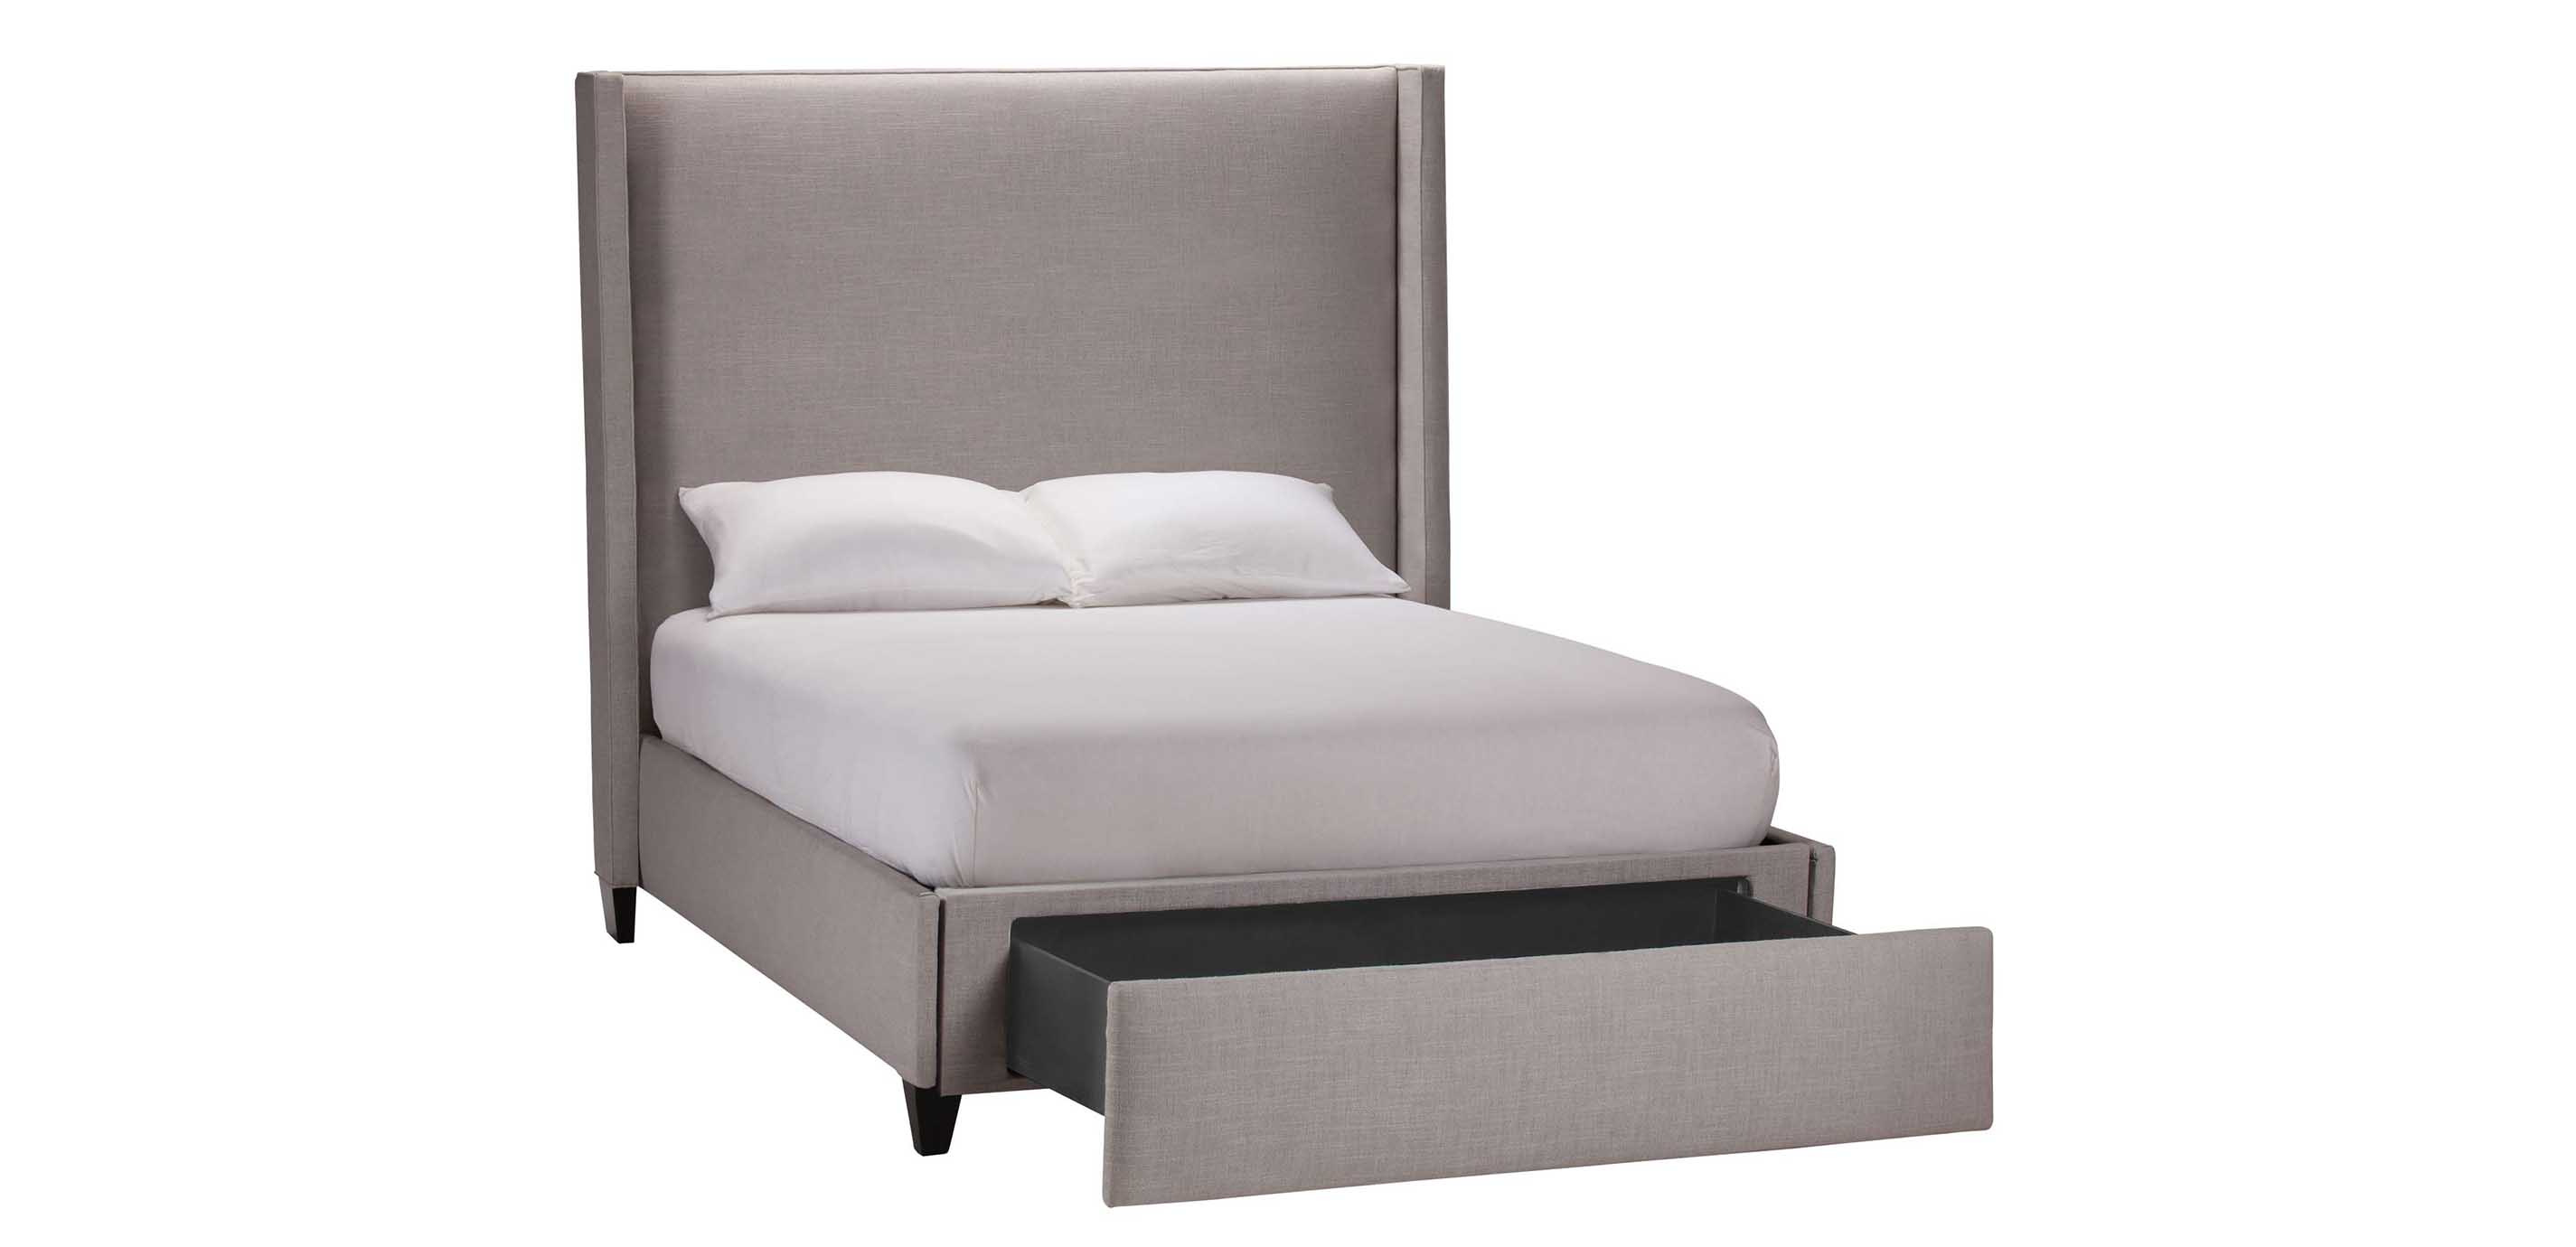 Colton Upholstered Storage Bed With, Tufted King Bed Frame With Storage